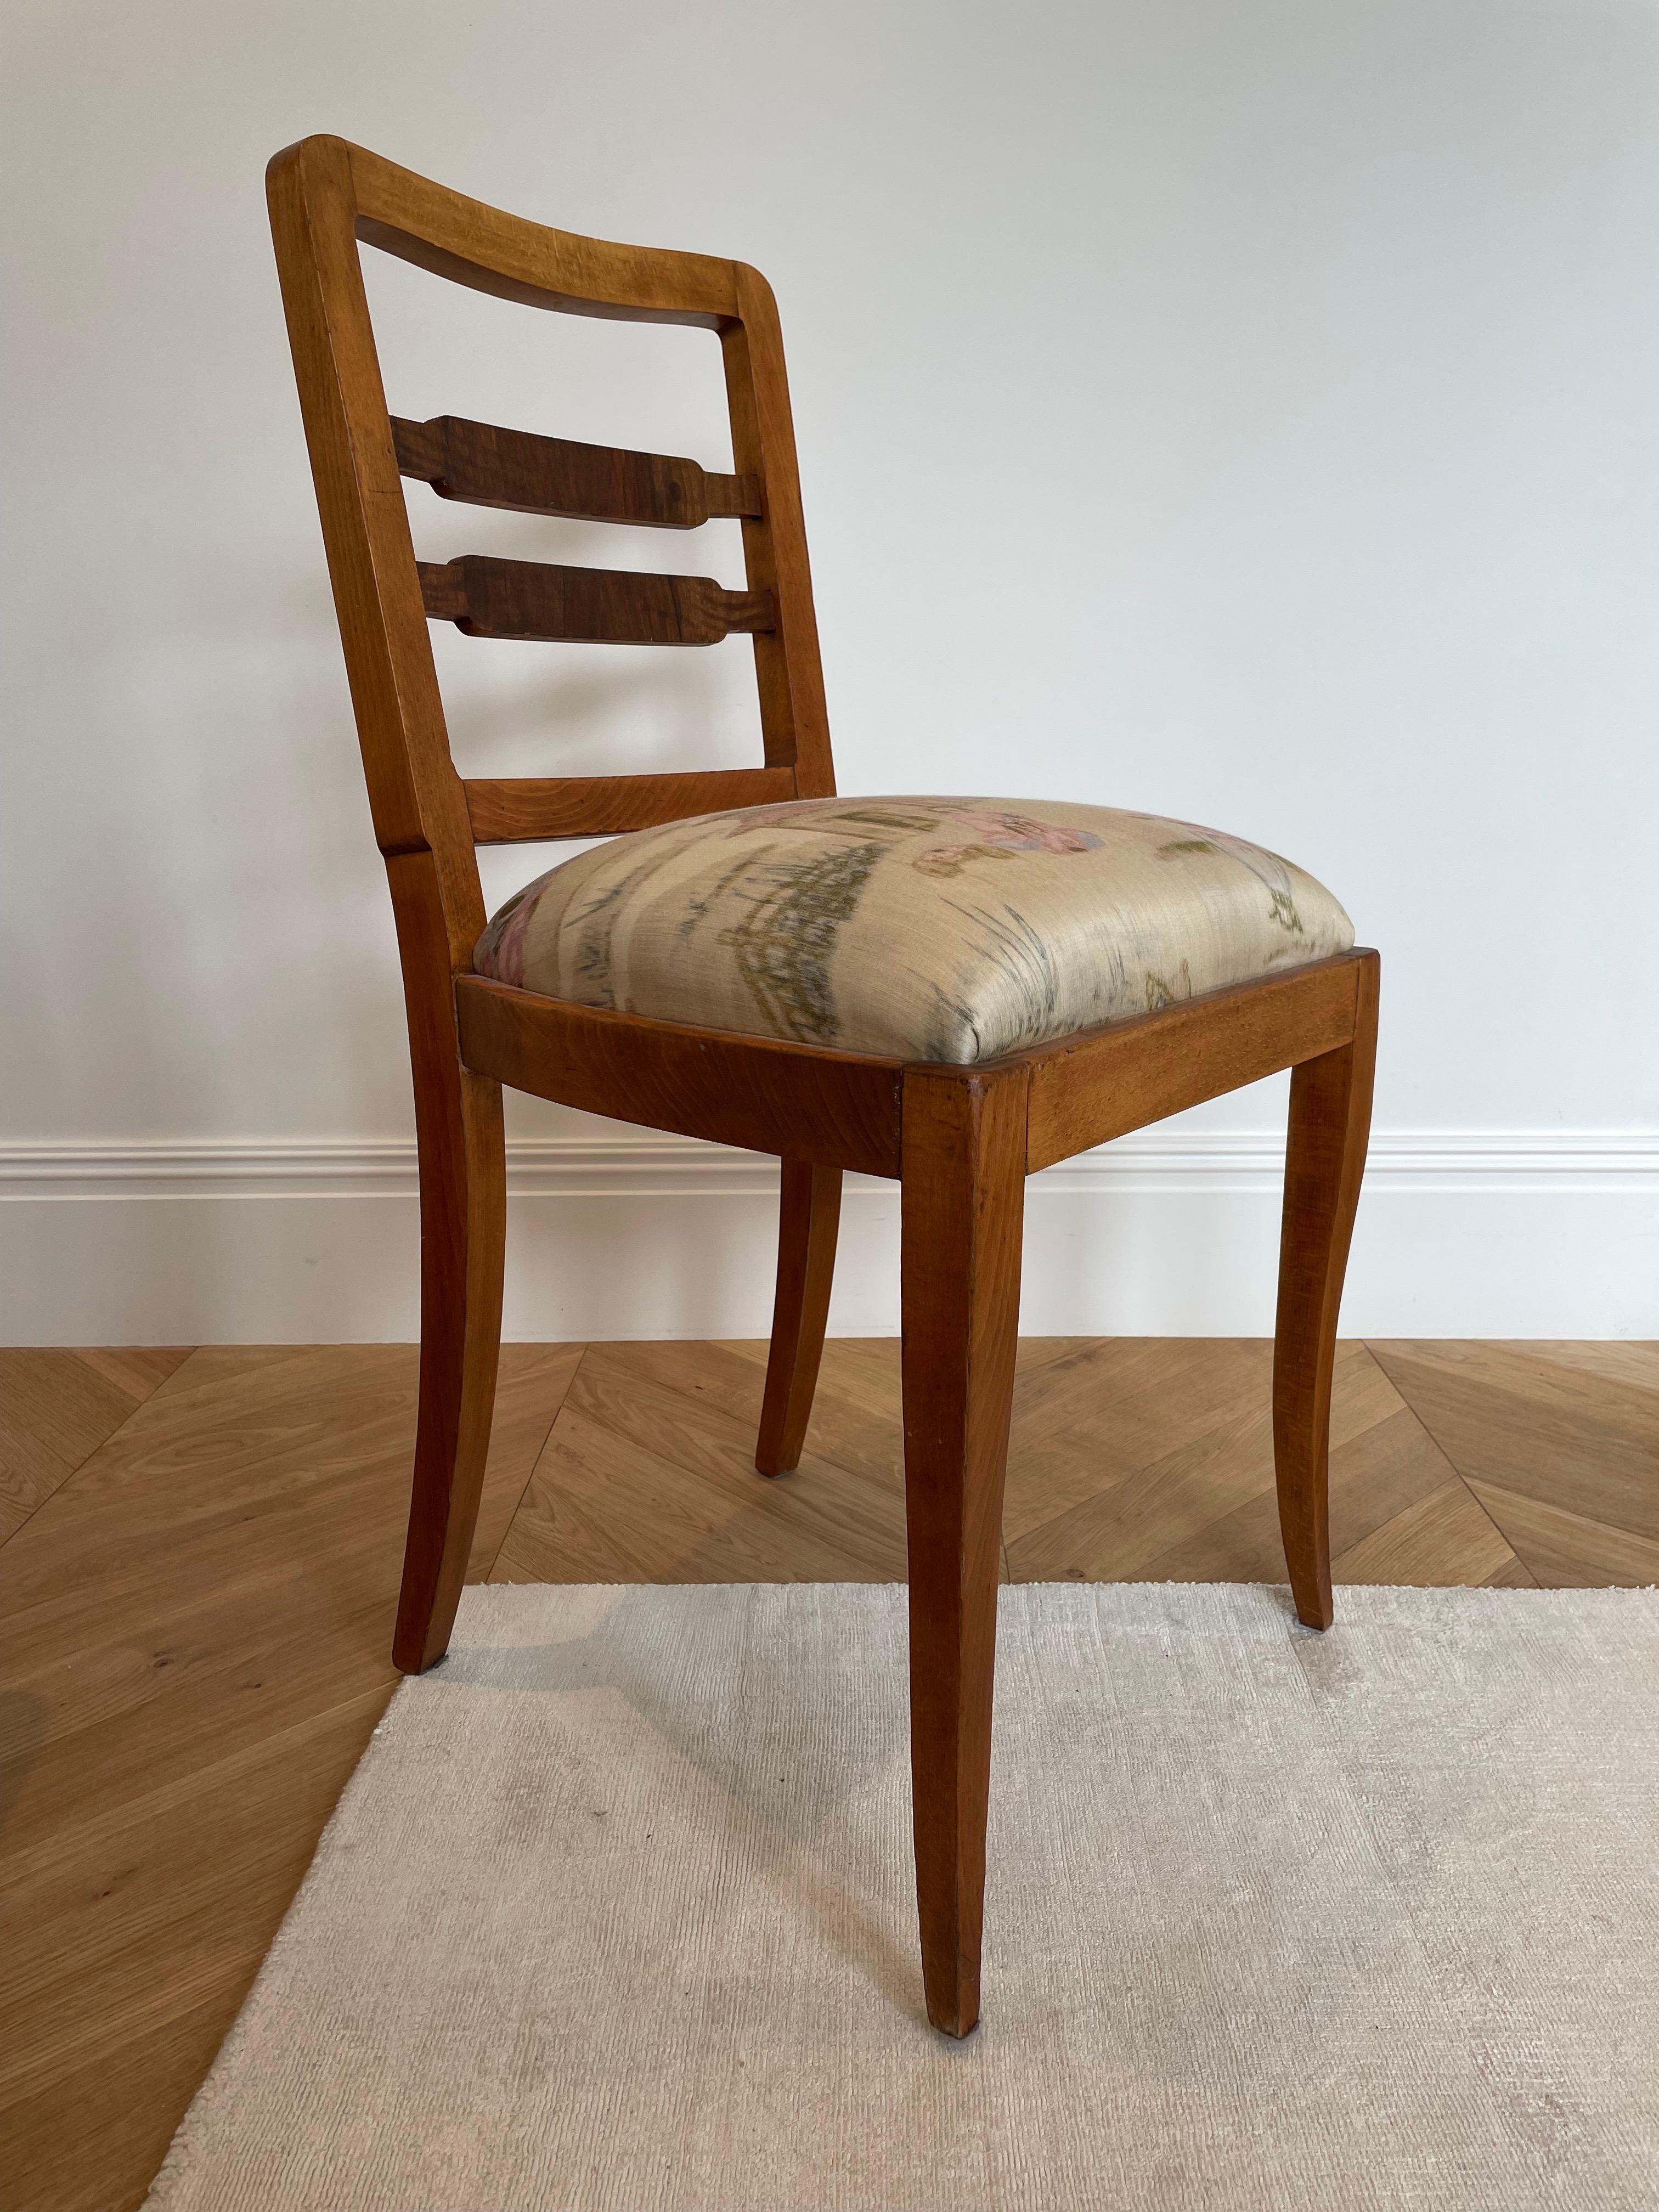 Kunming Chairs, Art Deco In Excellent Condition In London, England